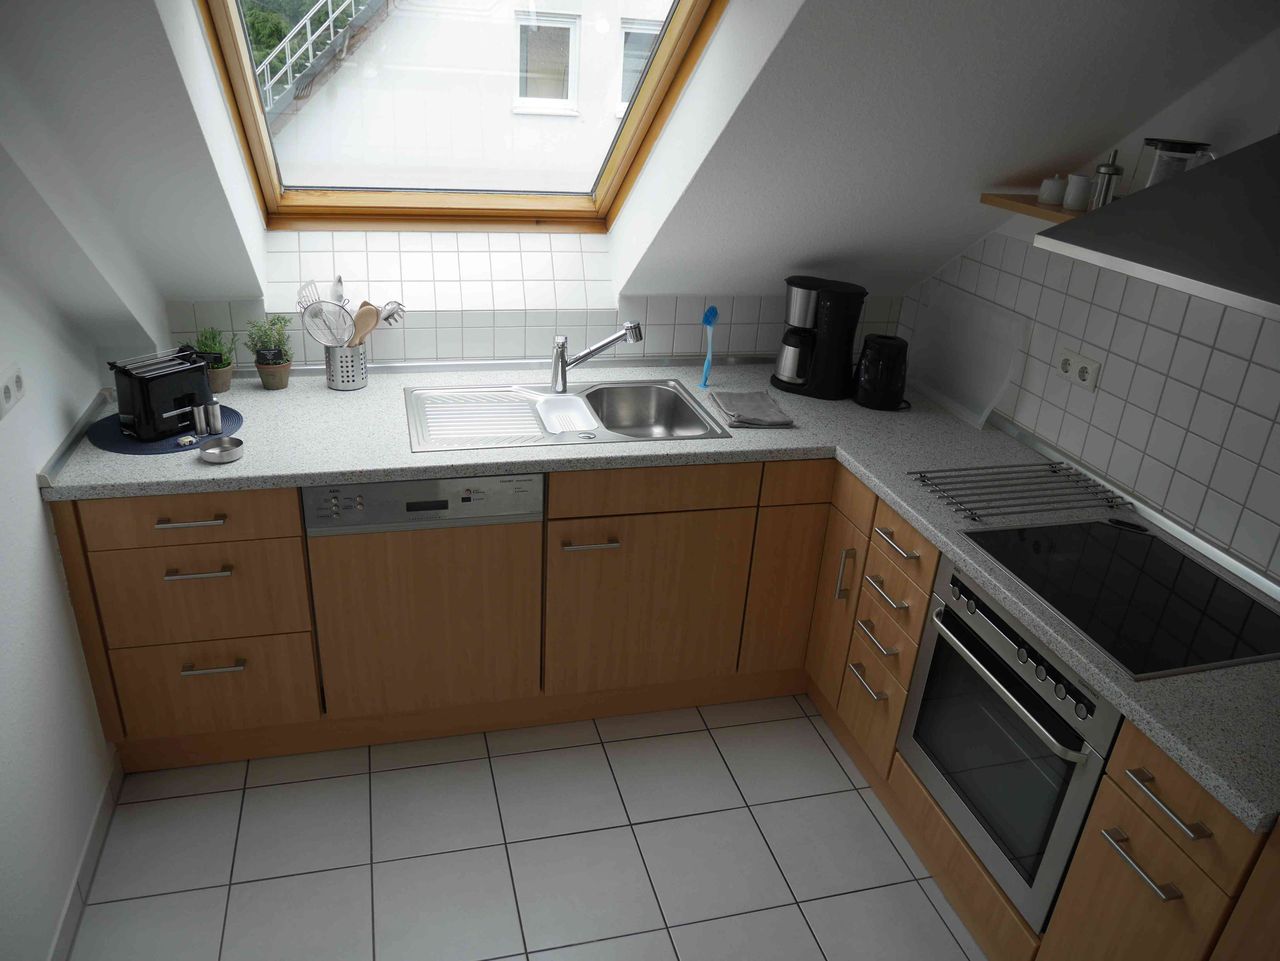 Lovingly furnished and stylish flat in Ratingen